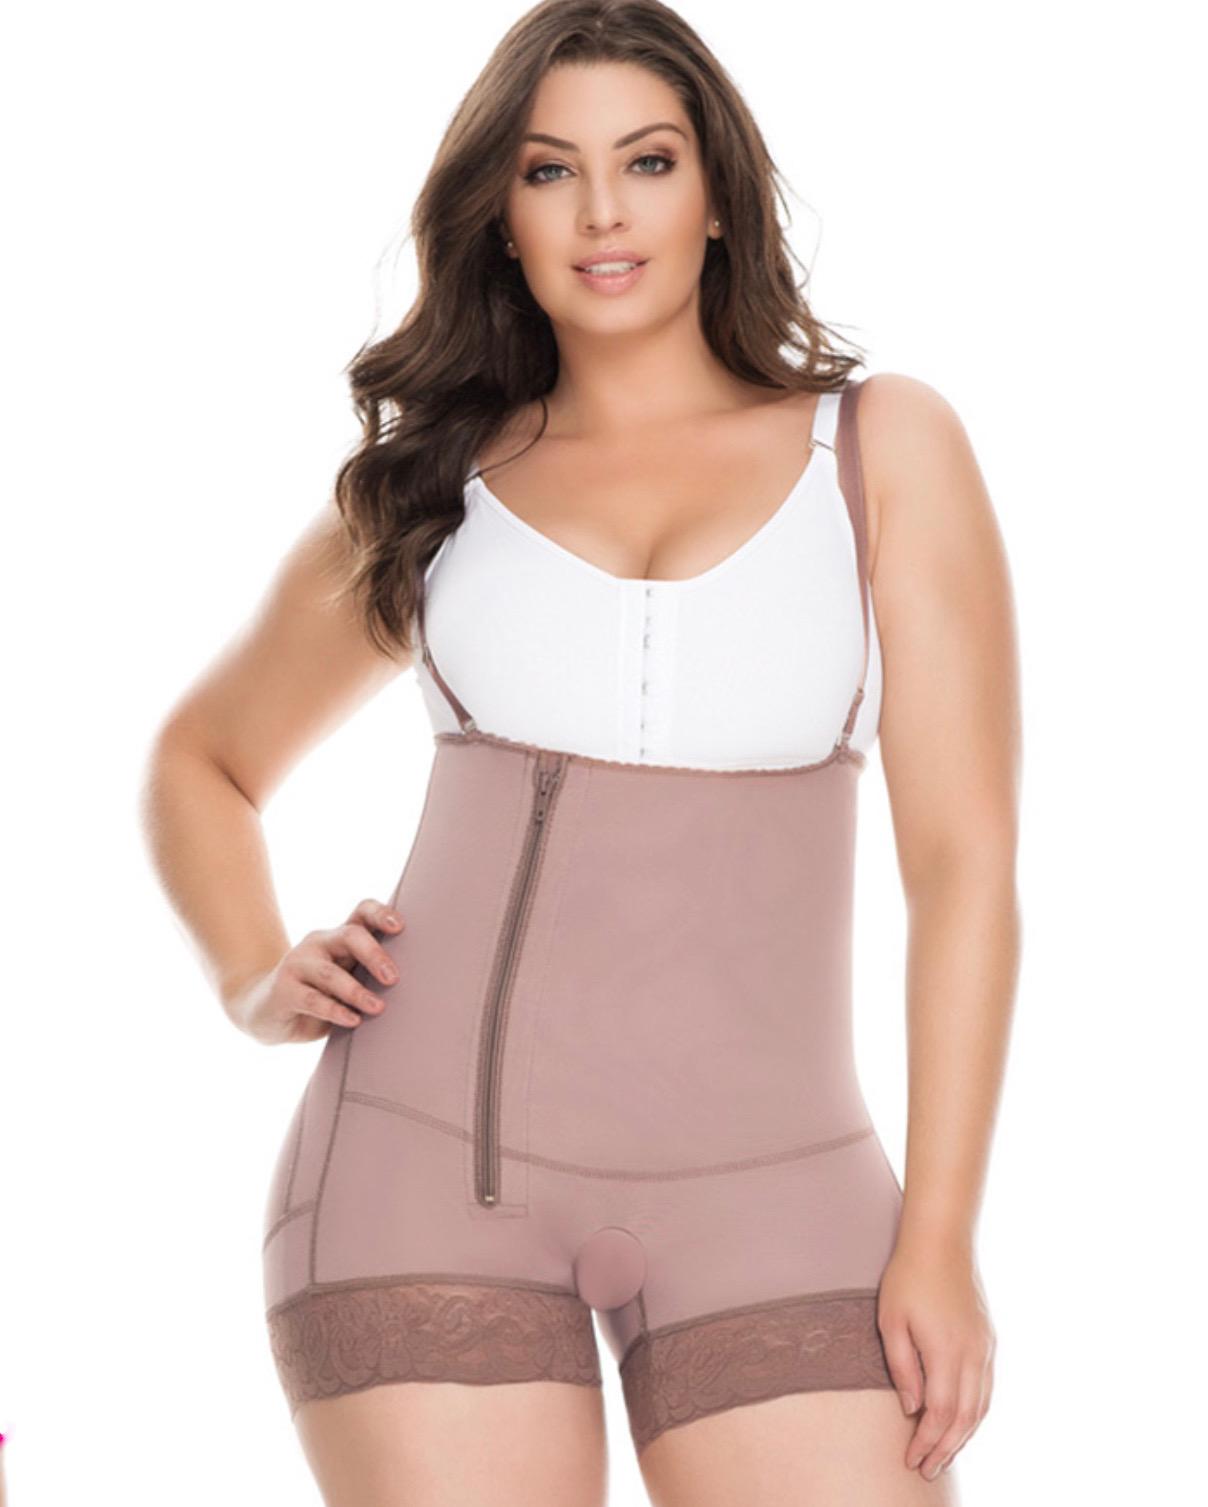 Referencia: 053 colombian girdle